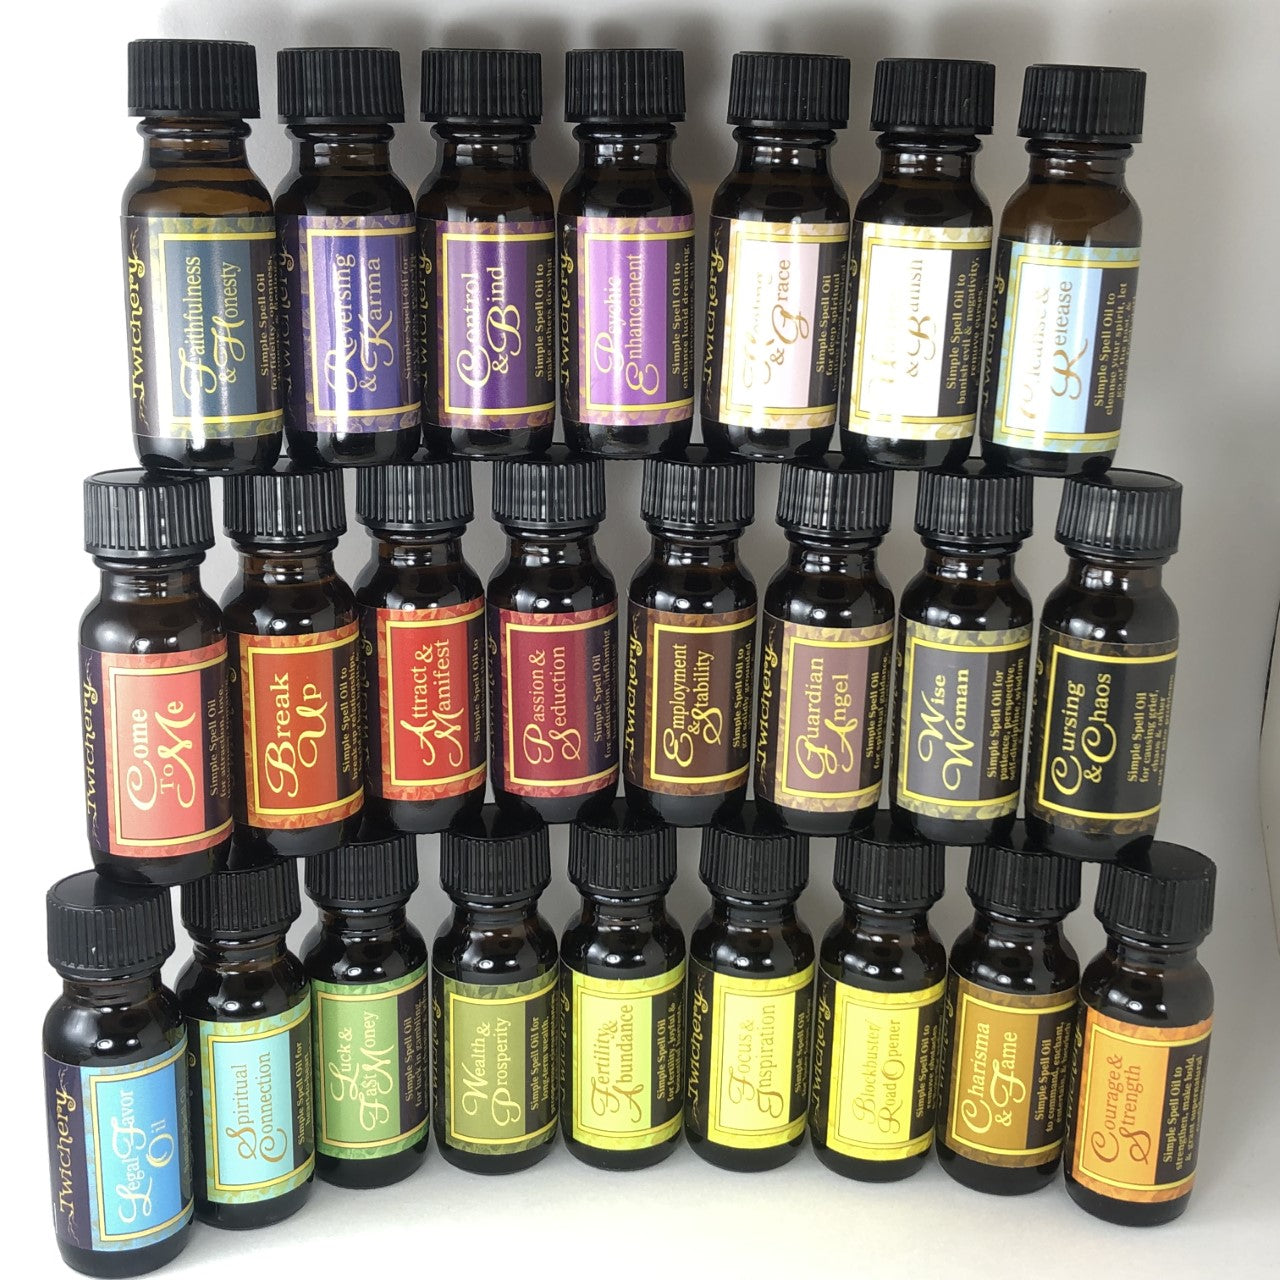 Twichery Quikspell Oils for stability and employment. Beautifully collectible! Wise Woman Oil pictured with all other Twichery Quikspell Oils! Hoodoo, Voodoo, Wicca, Pagan